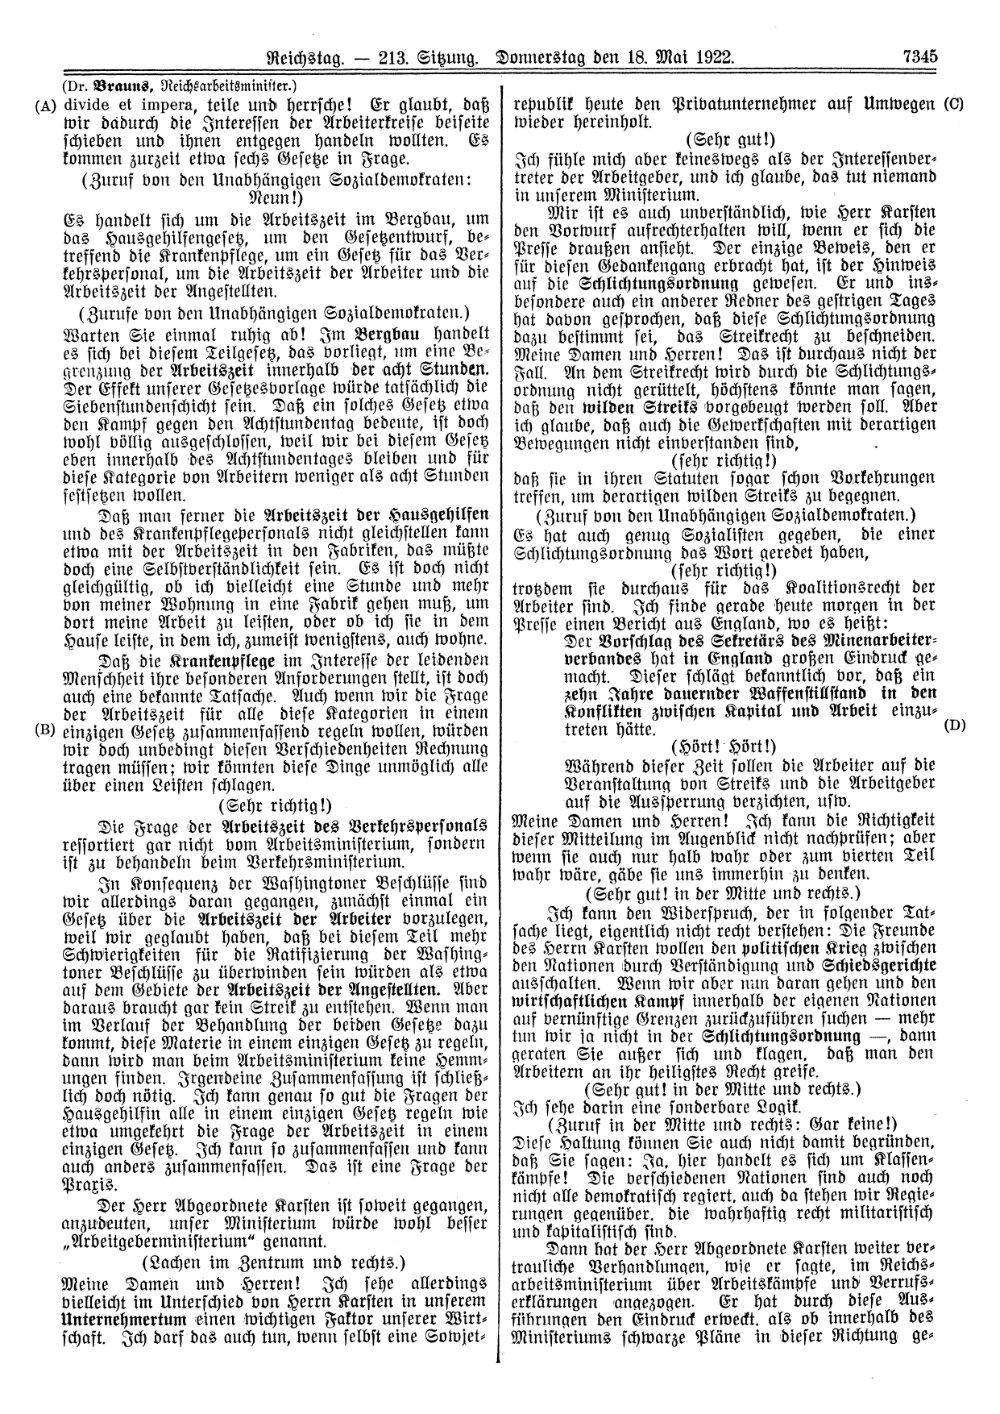 Scan of page 7345